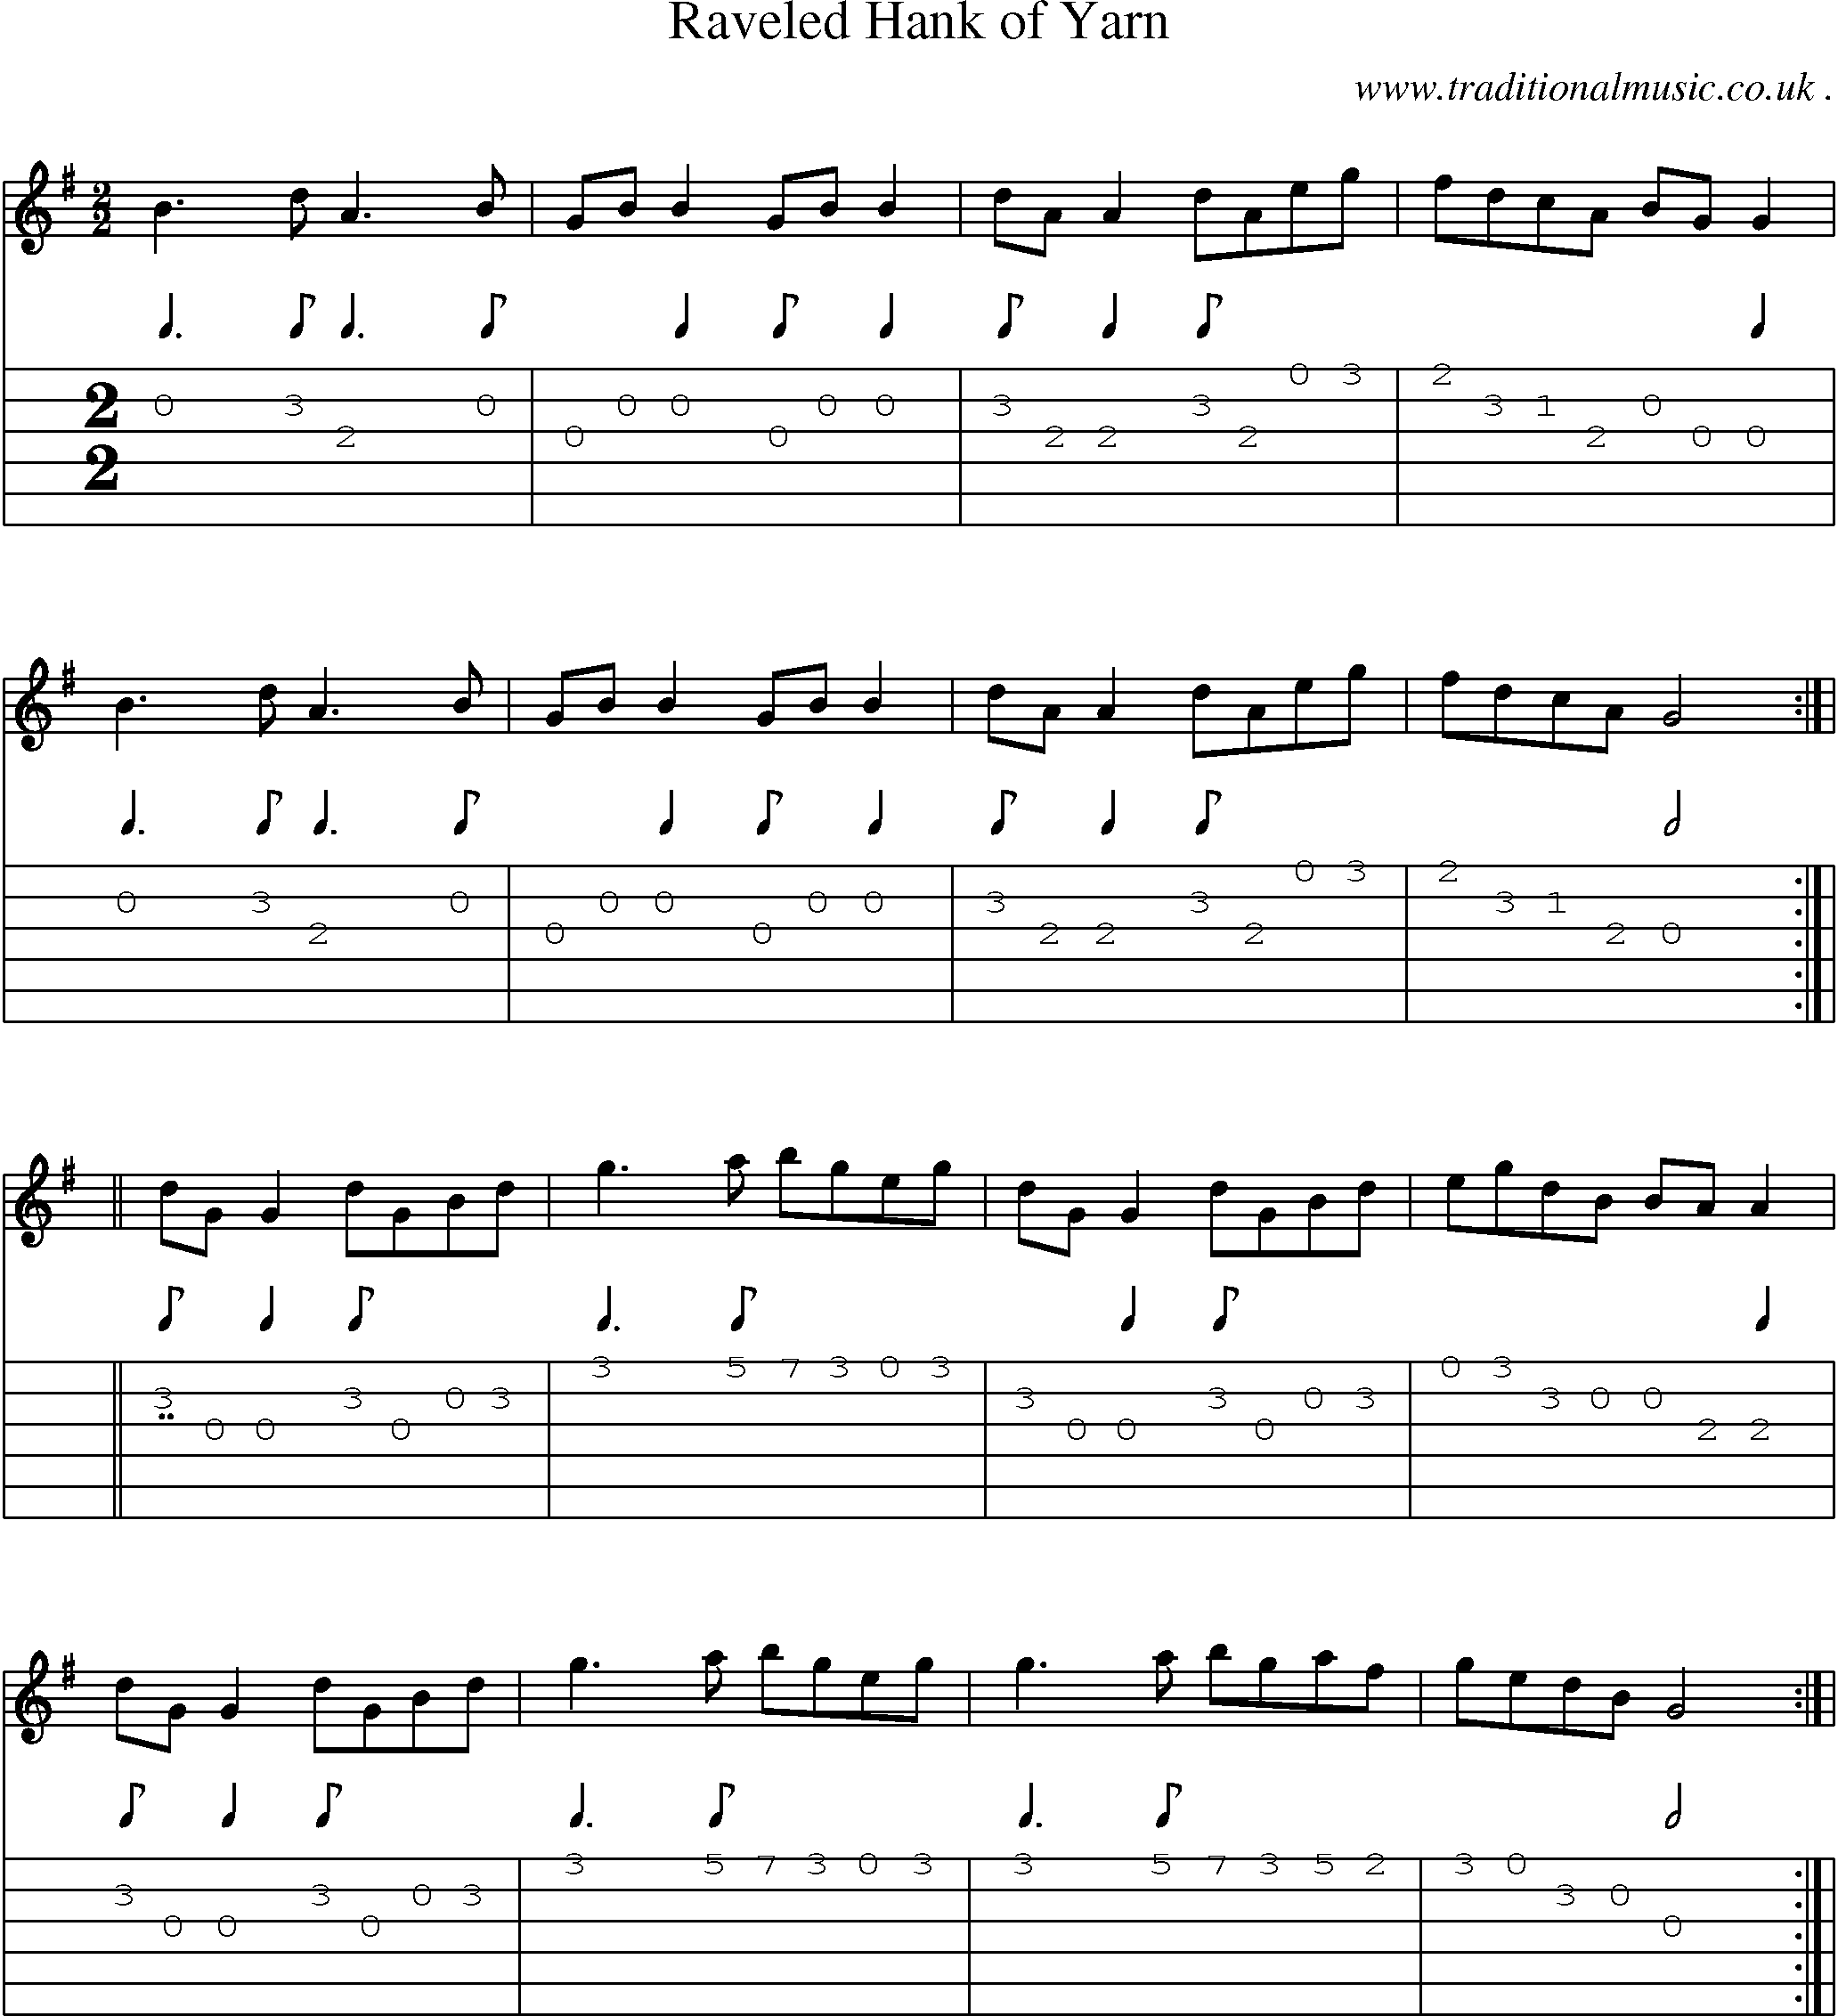 Sheet-Music and Guitar Tabs for Raveled Hank Of Yarn